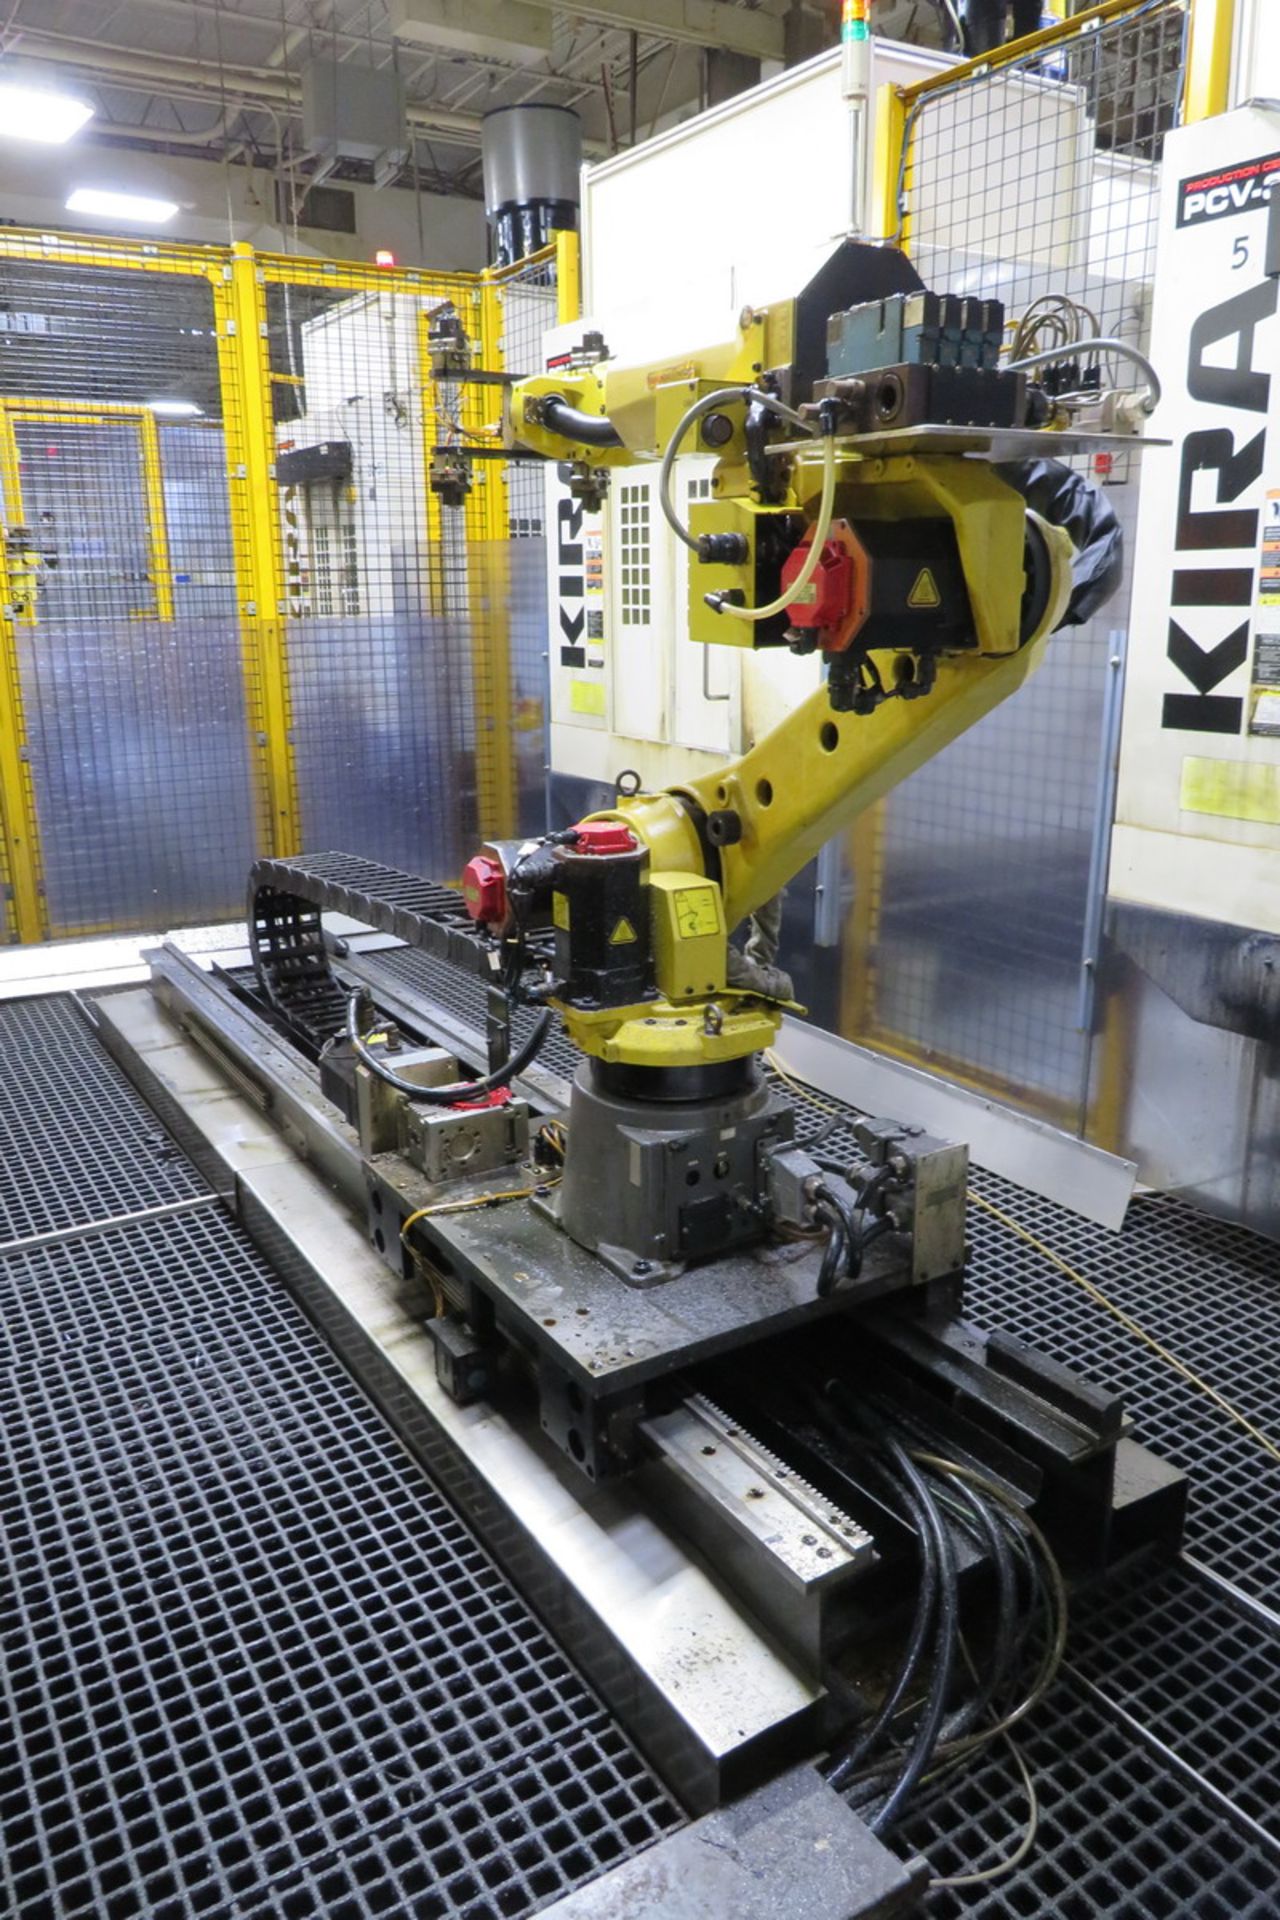 Fanuc Model M-20iA, 6-Axis Robot with Fanuc R-30iA Controller, Teach Pad (Ref. No. 20-62) (Sold -